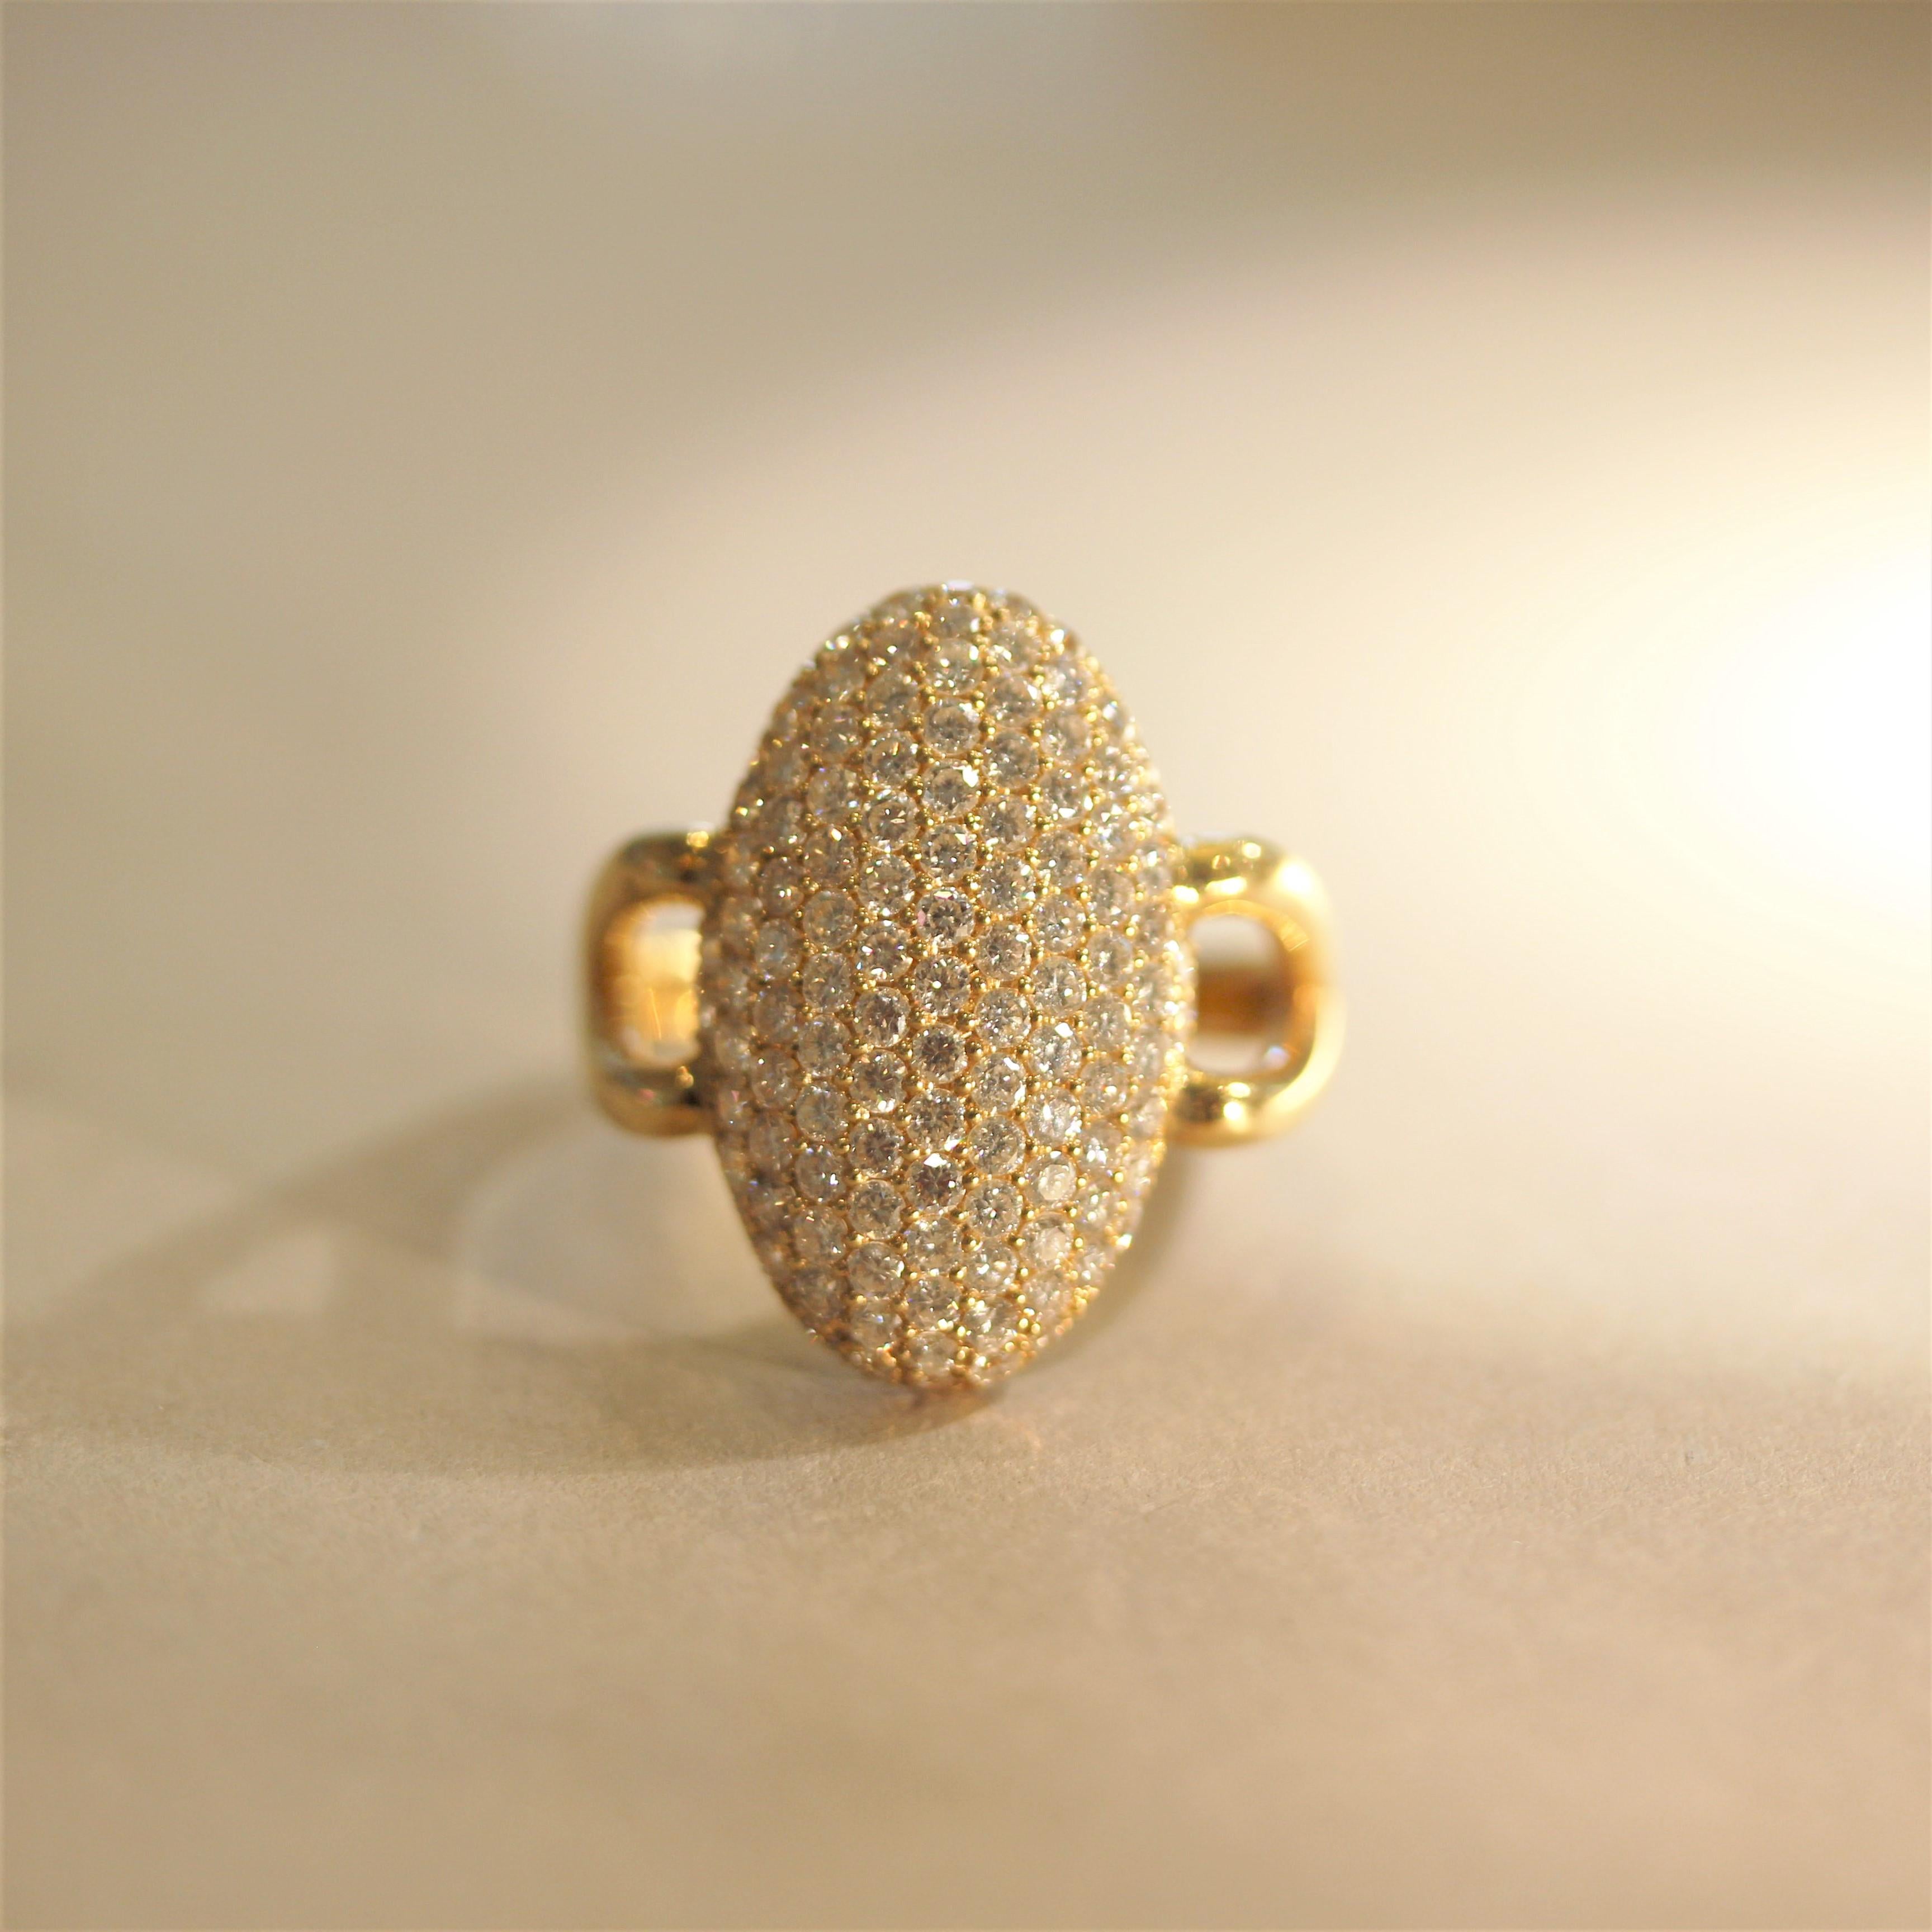 A chic and stylish modern designed ring! It features 2.13 carats of fine round brilliant-cut diamonds which are pave-set over a long-stretched dome gold mounting, in a navette style. This lovely ring is made in 18k yellow gold and can be worn